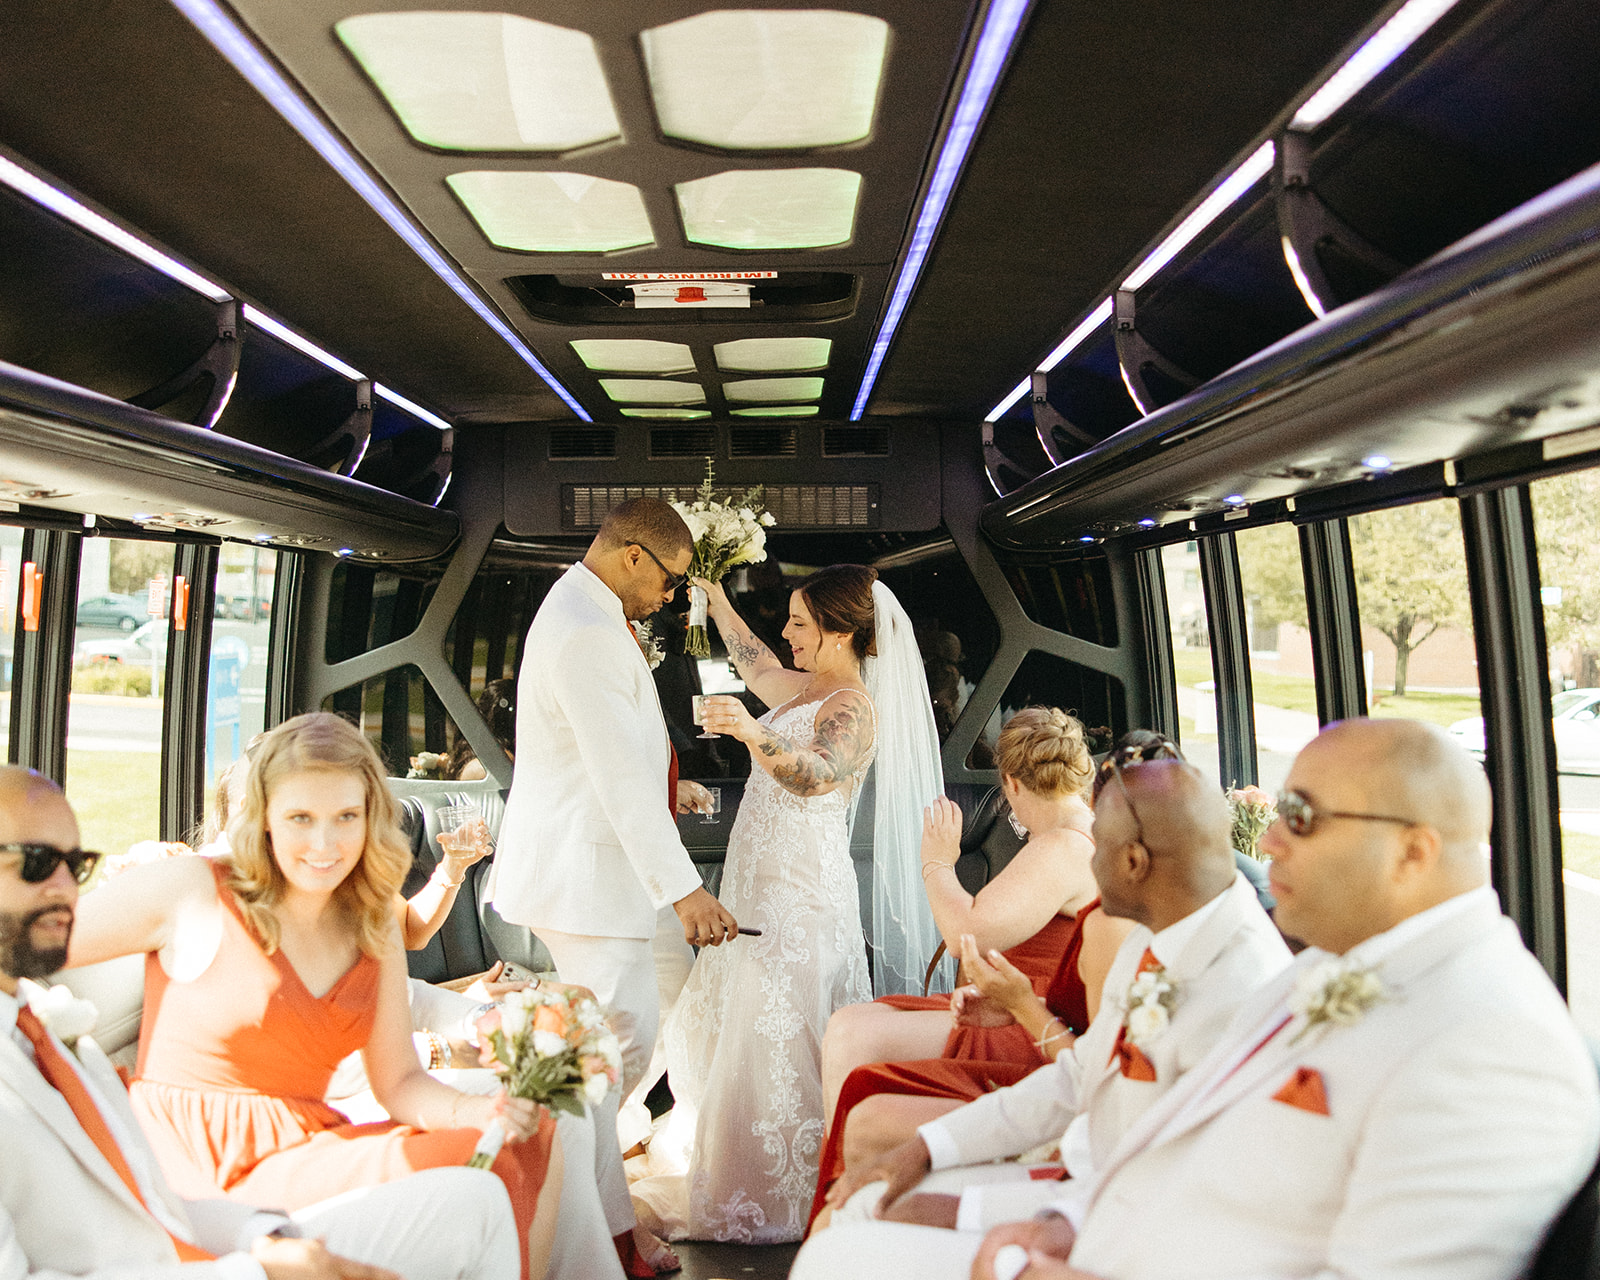 Bride, groom and their entire wedding party of a party bus